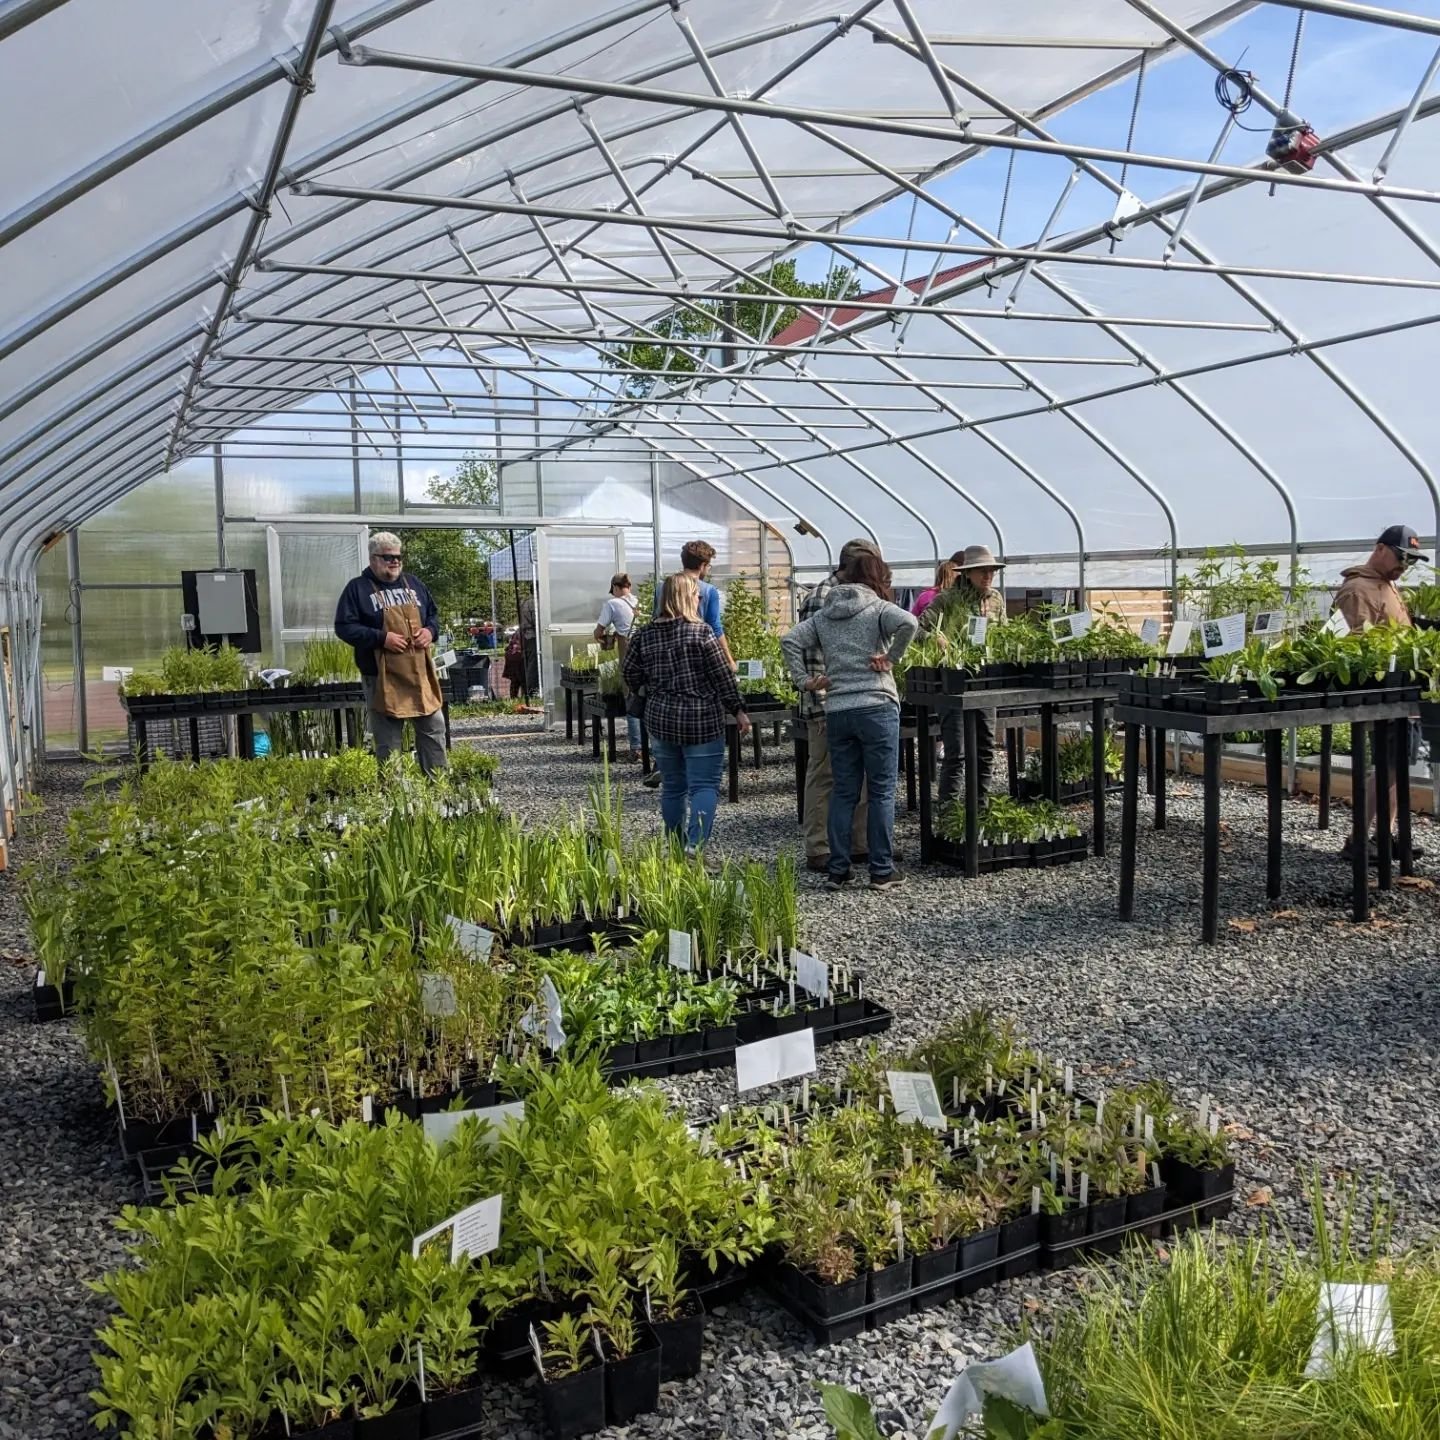 Fantastic day at the Native Plant Sale!! Be sure to join us tomorrow from 9:00 am - 1:00 pm at Dragonfly Farm at Jacob Reiff Park for day two! Come browse over 150 different native plant species including flowering perennials, ferns, vines, grasses a